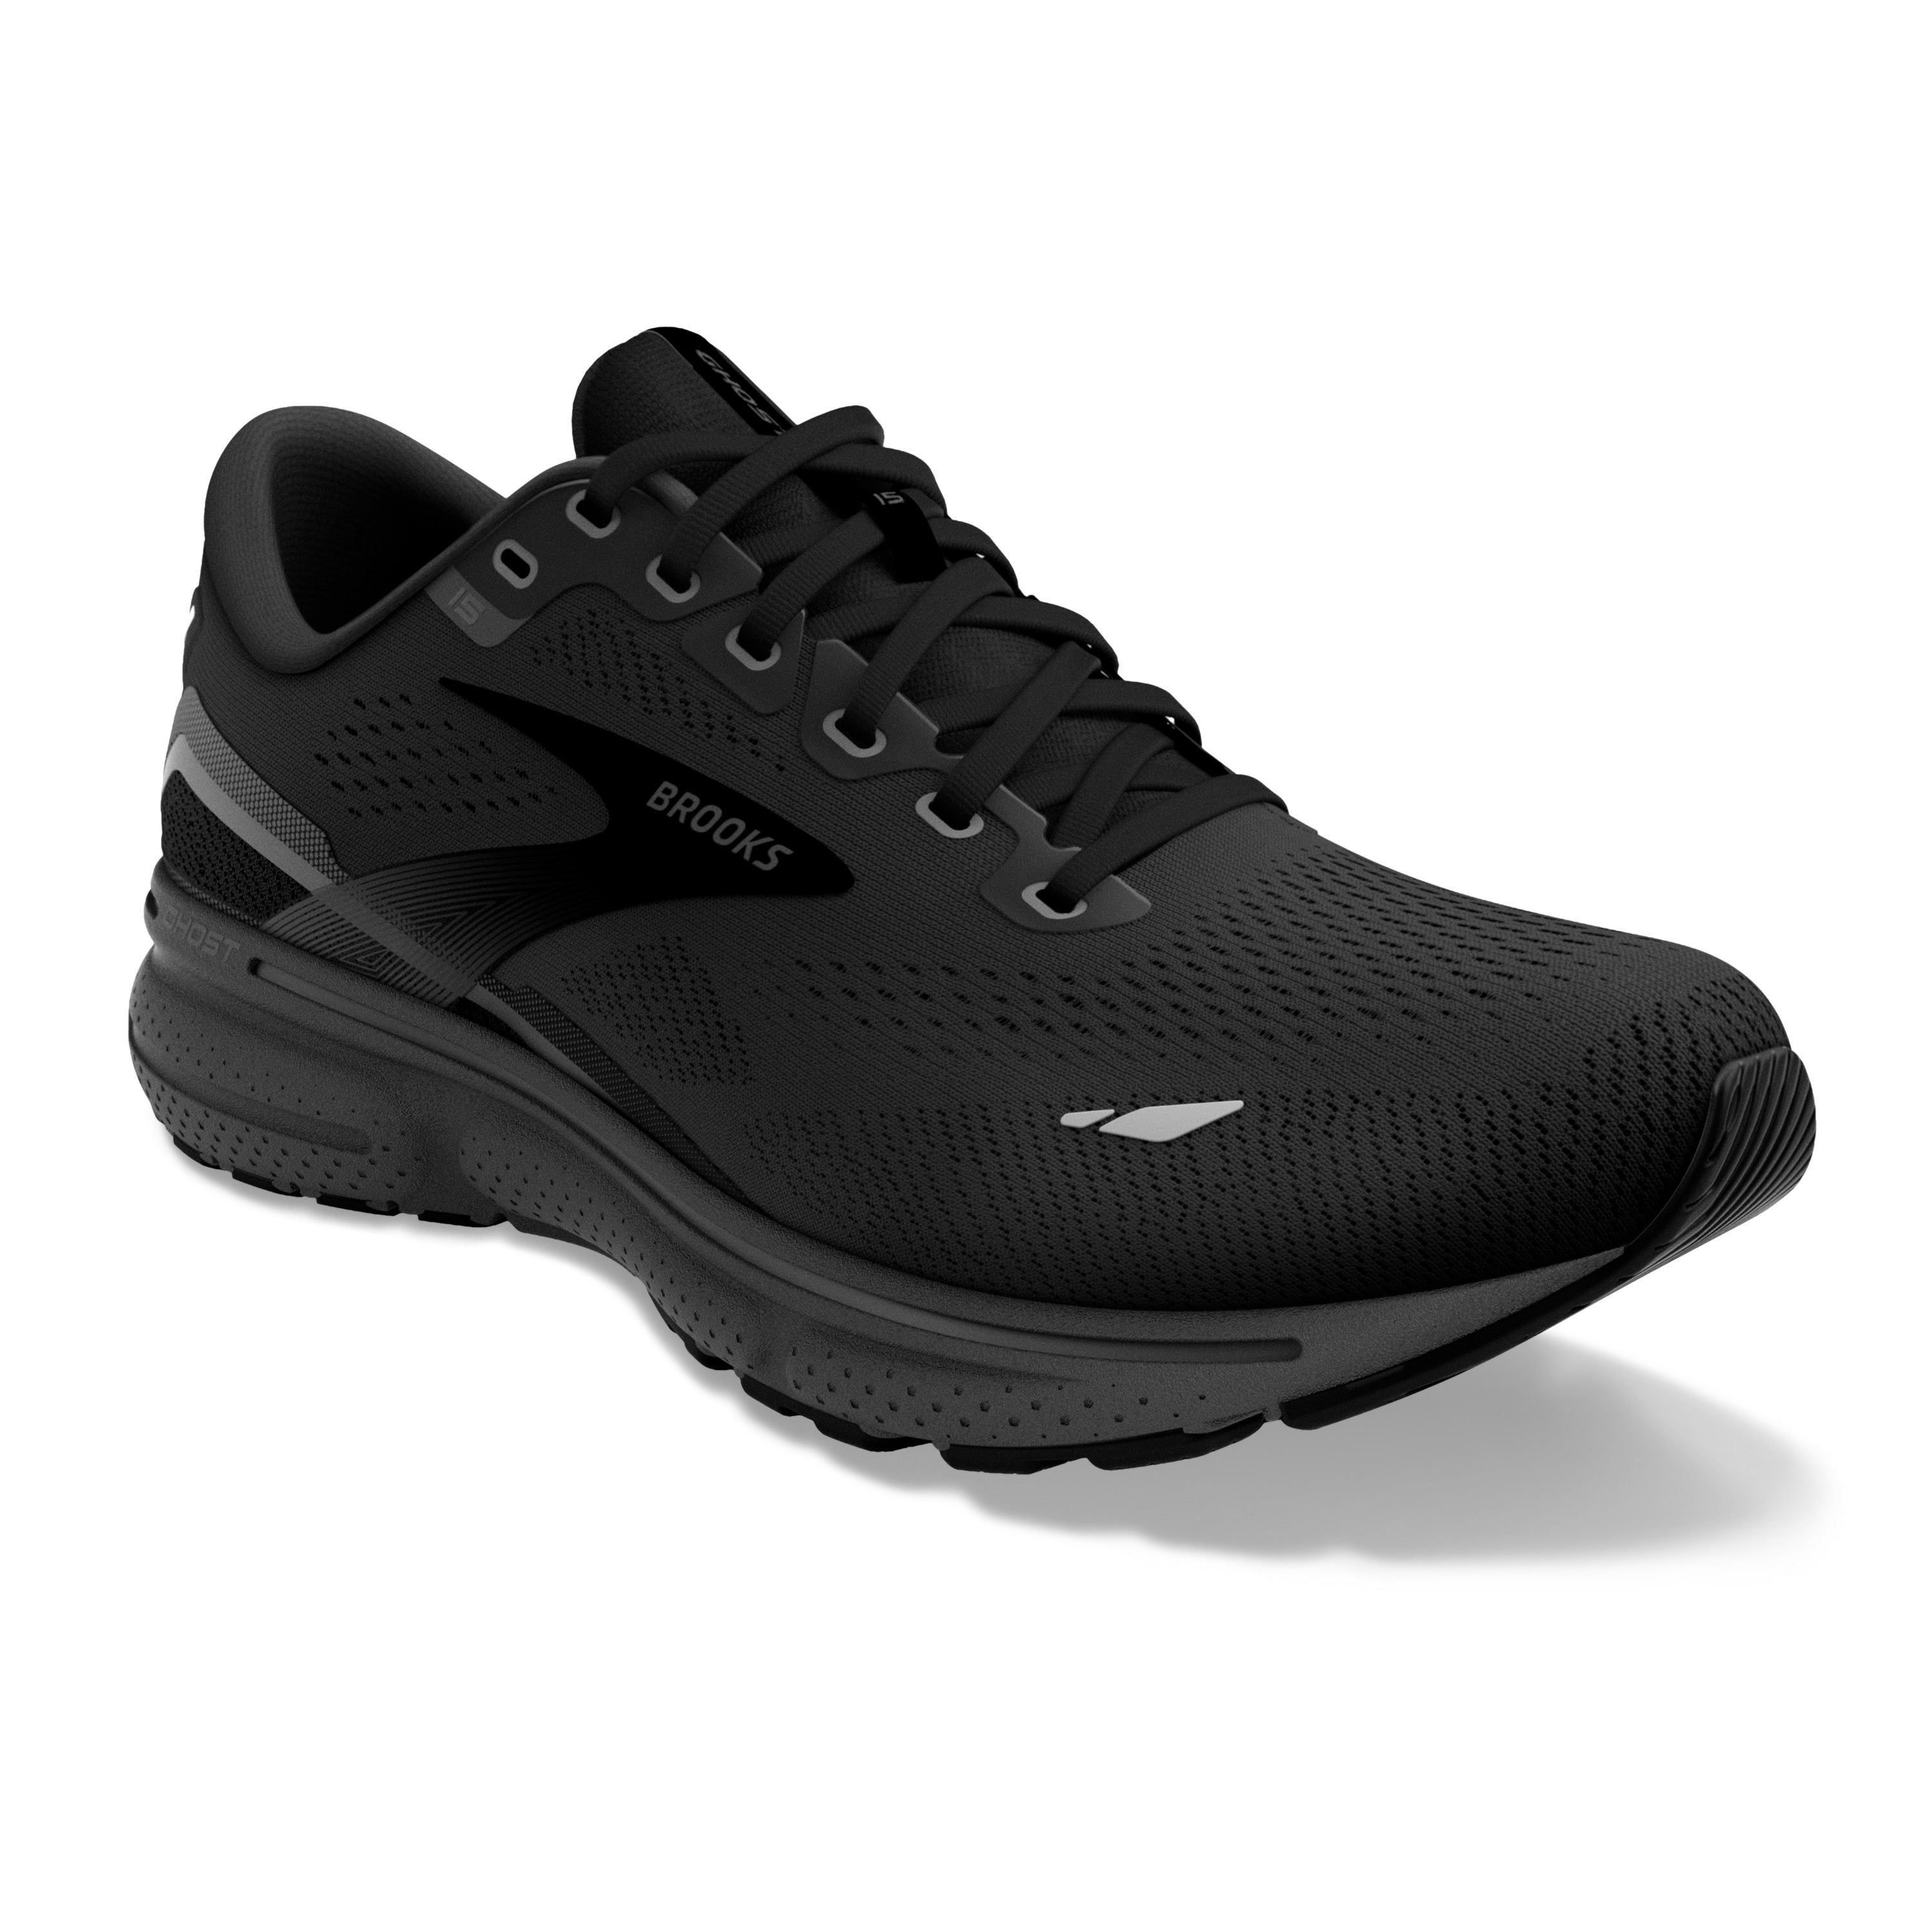 Brooks Ghost 15: Buy Wide Feet Running Shoes for Men Online - Brooks Running India